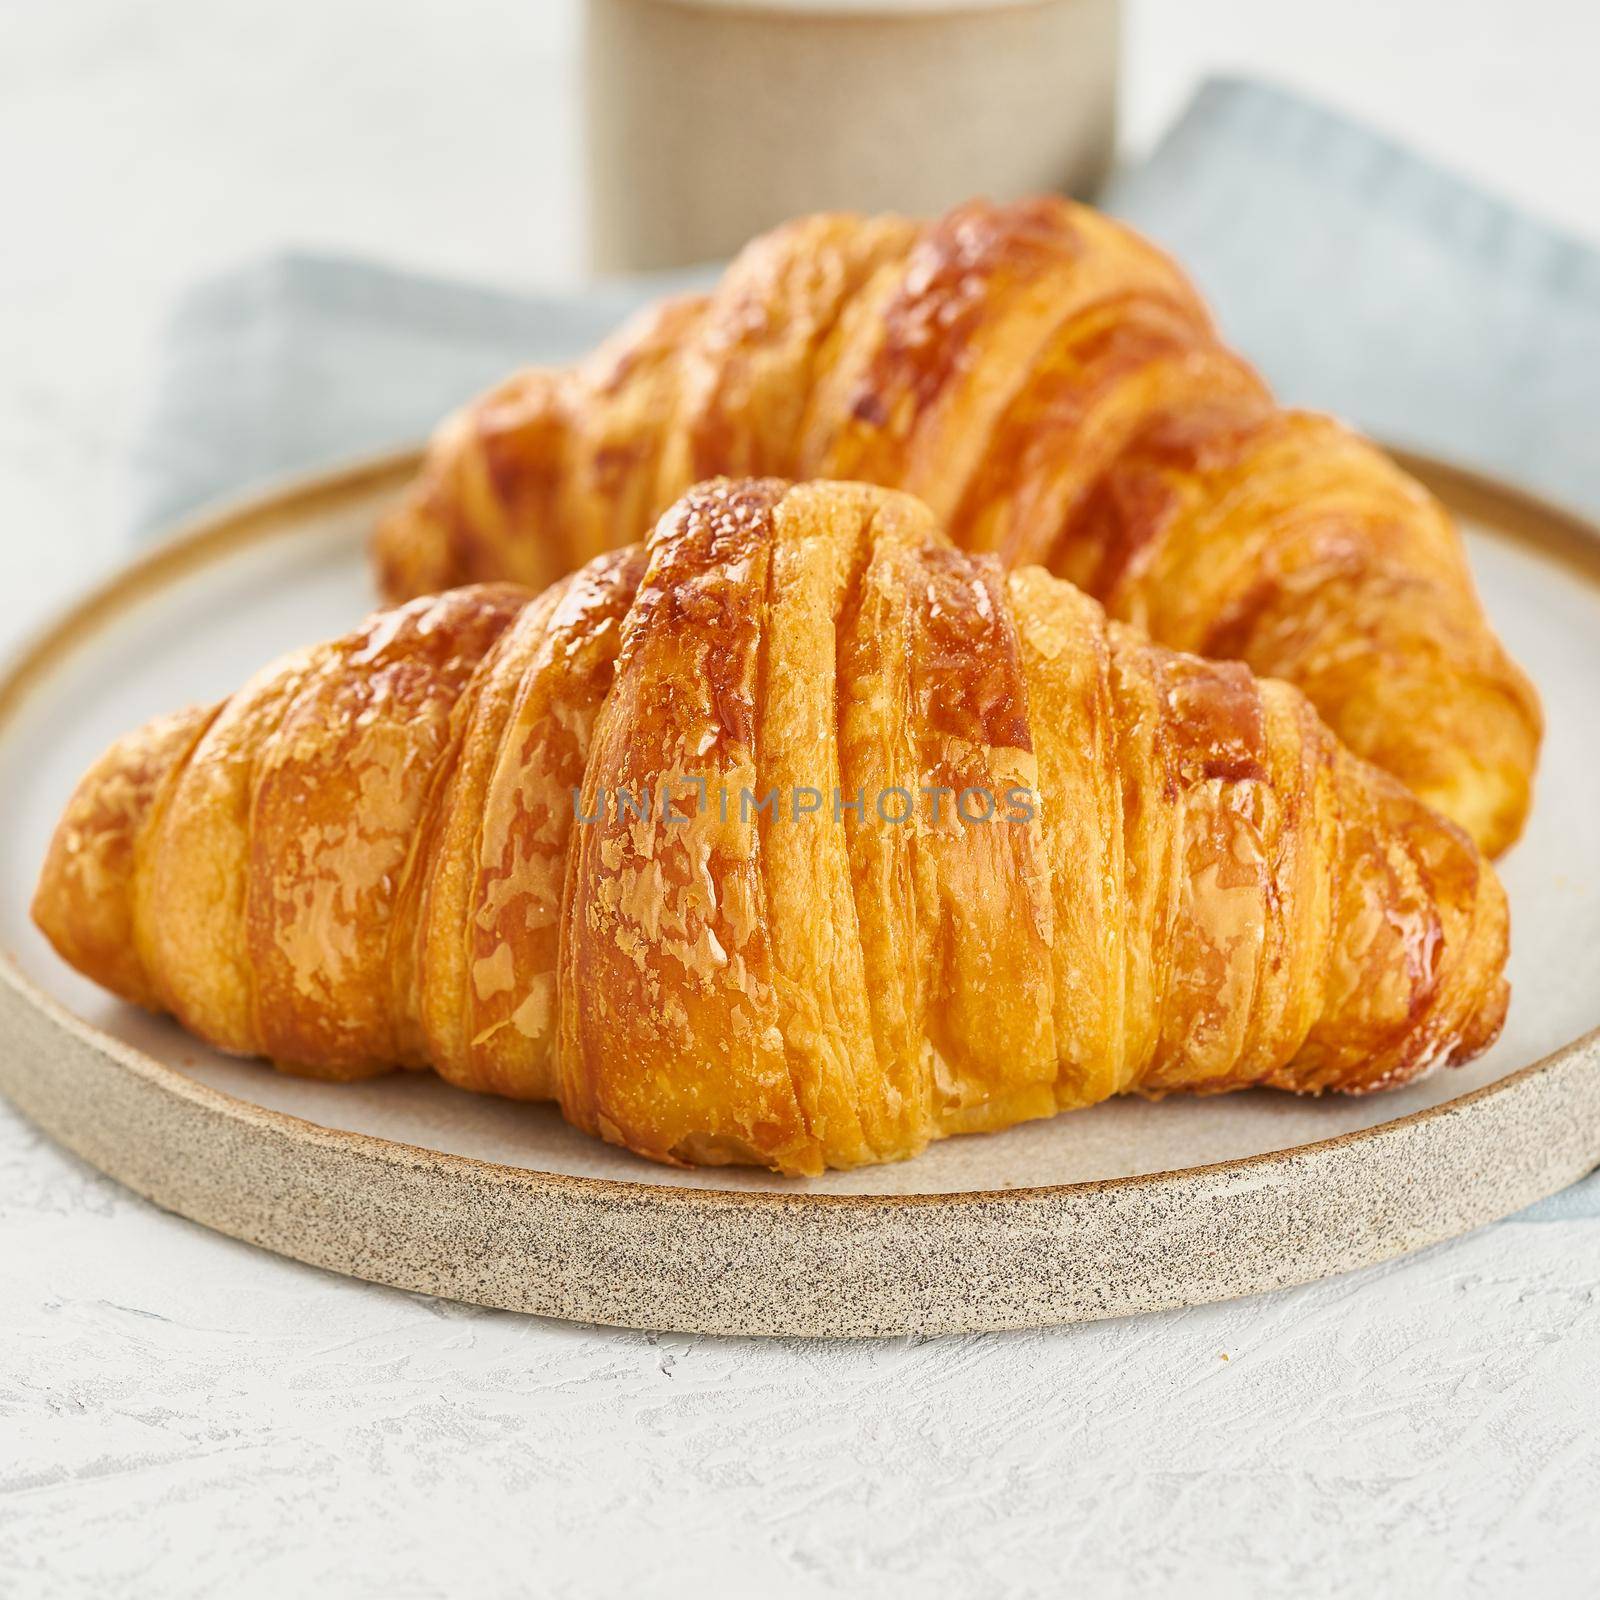 Two delicious croissants on plate and hot drink in mug. Morning French breakfast by NataBene